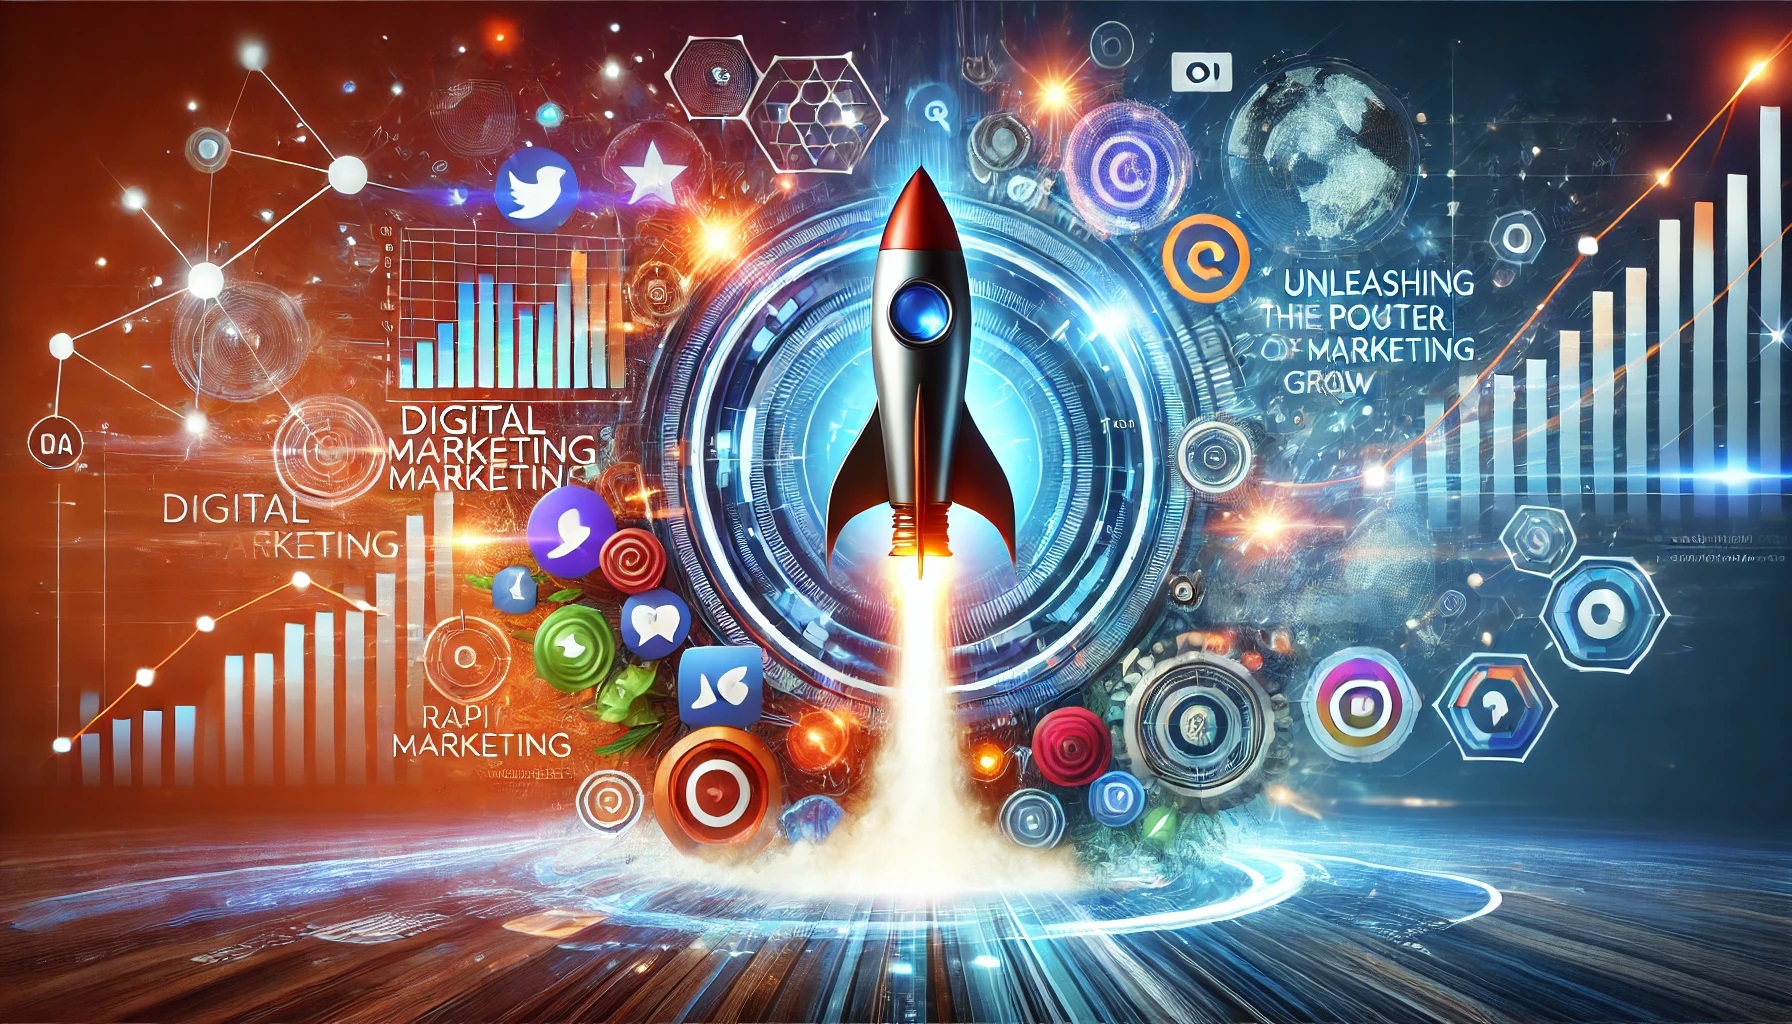 Digital marketing strategies for rapid business growth with social media icons, a digital marketing dashboard, and a rocket symbolizing growth